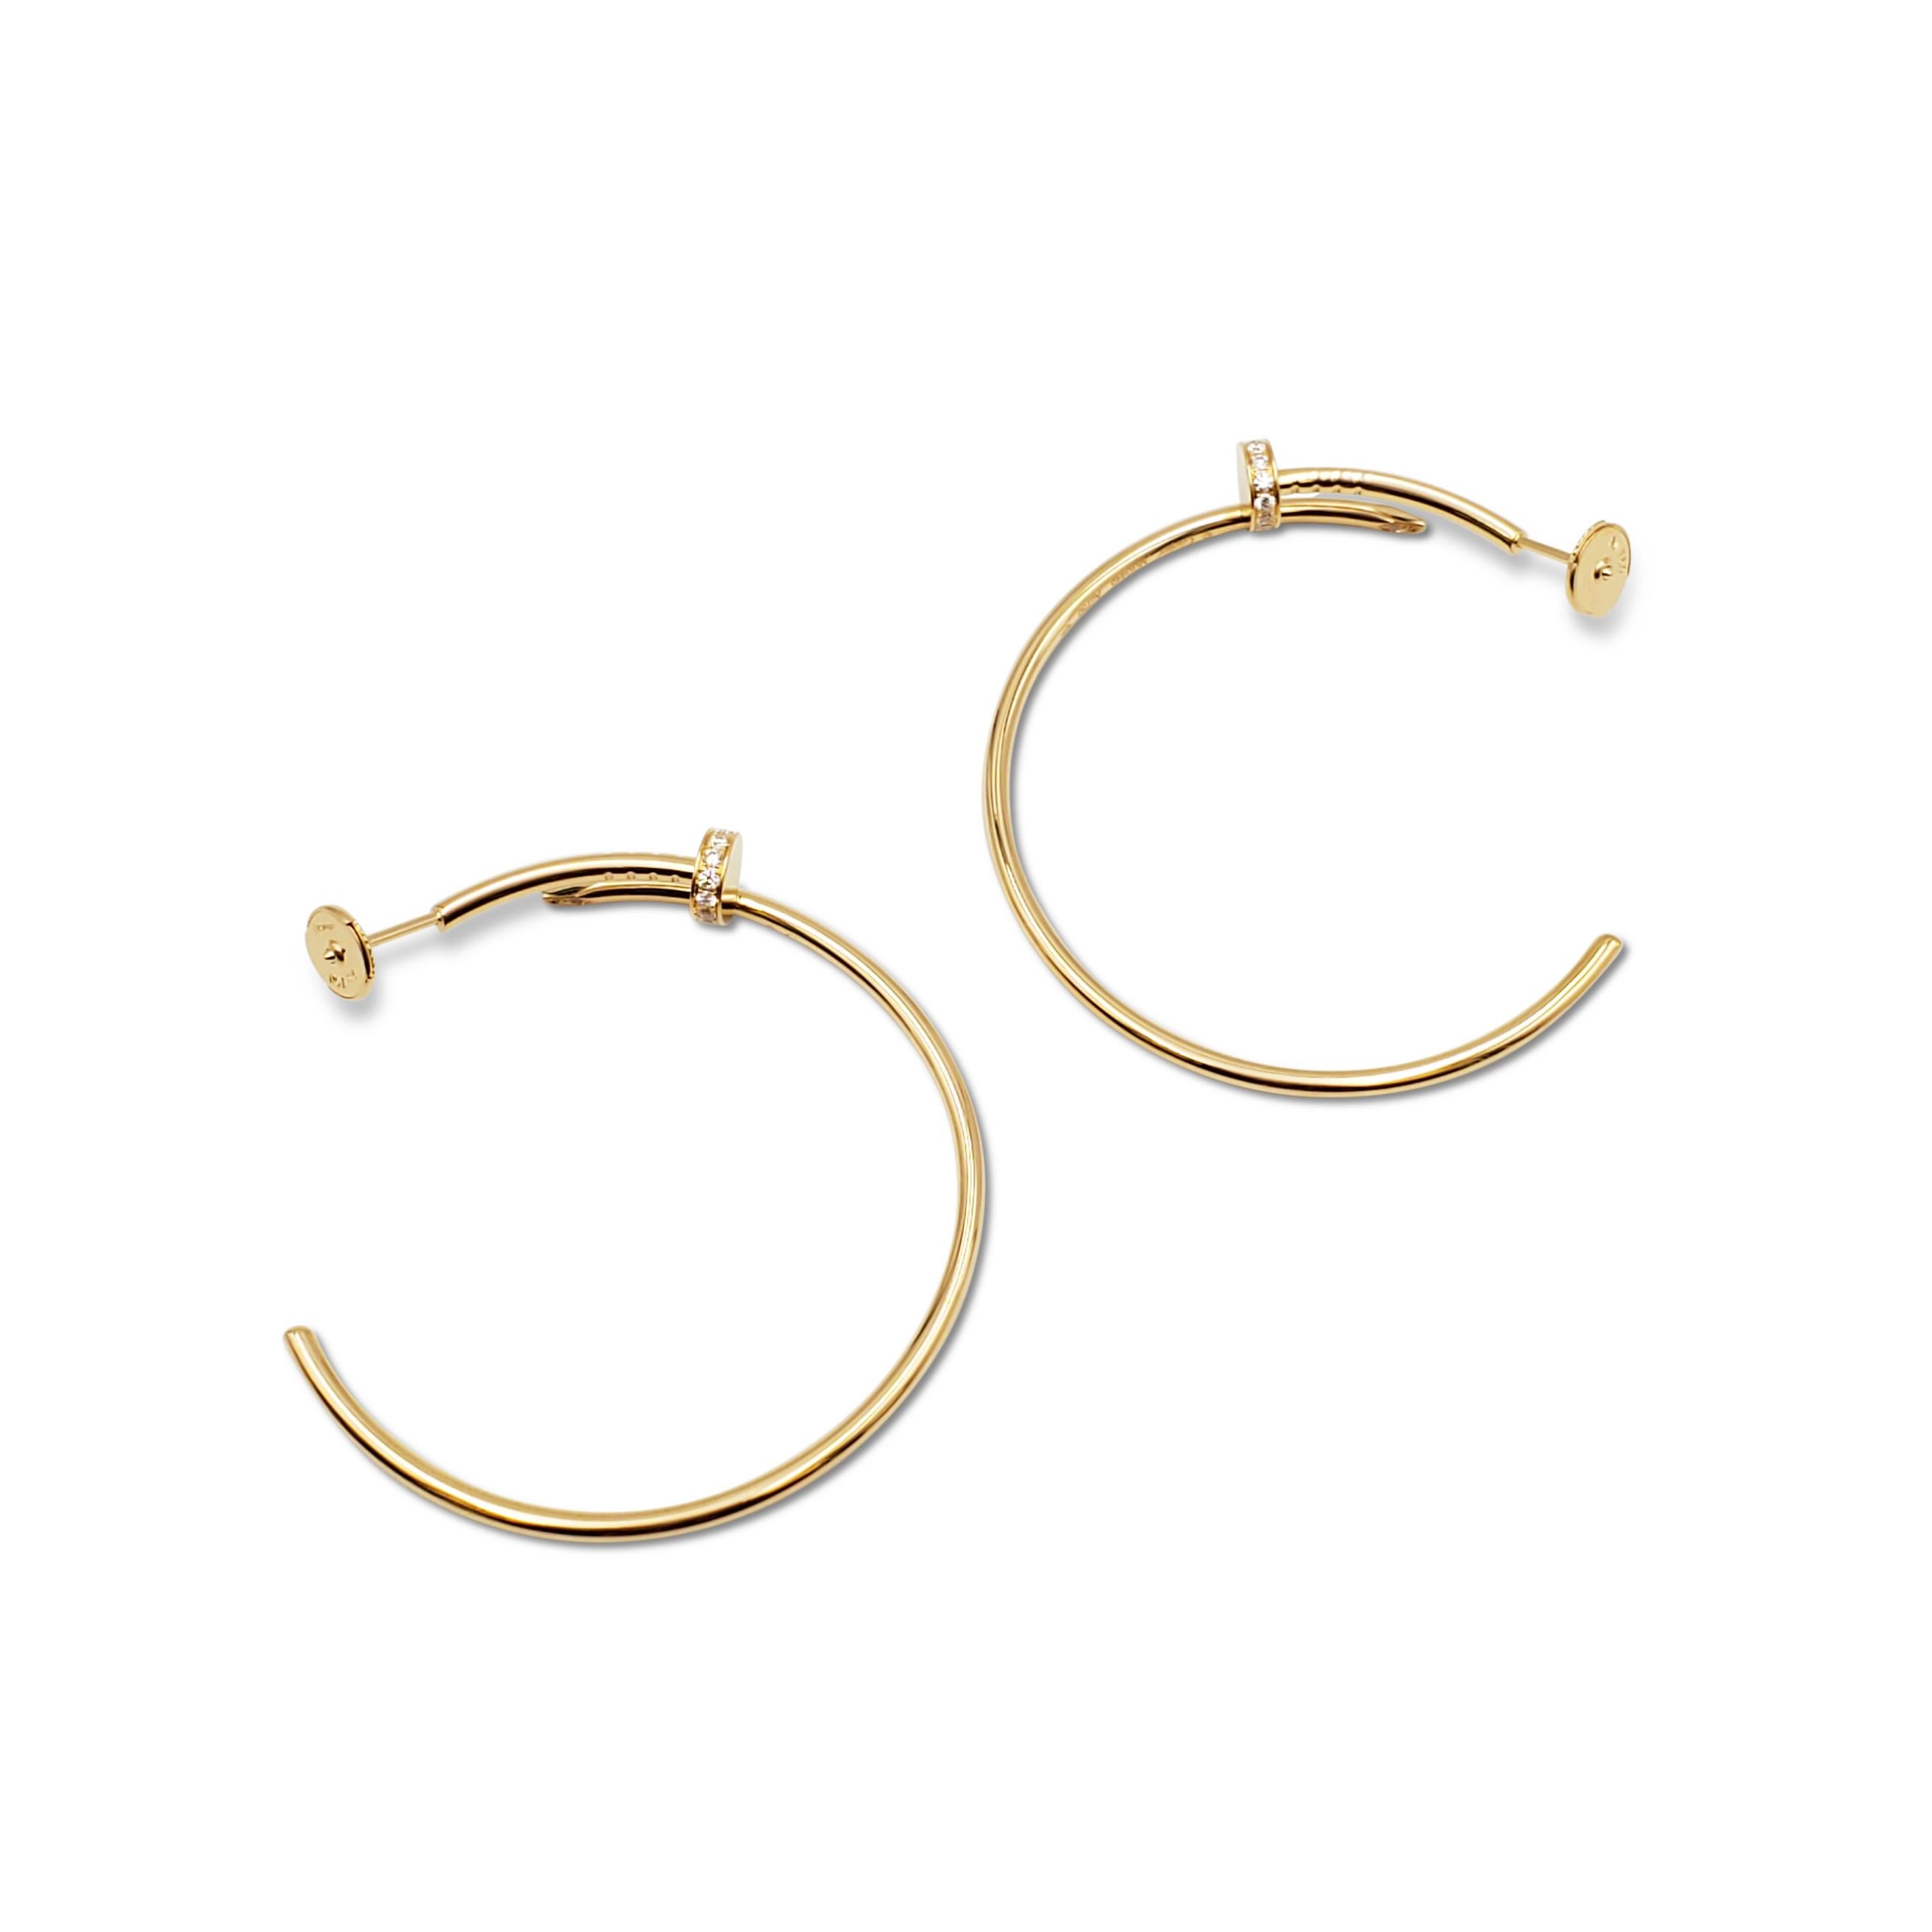 Authentic Cartier Juste Un Clou earrings crafted in 18 karat yellow gold features the iconic Cartier nail motif taking the shape of hoop earrings. The earrings are set with 28 round brilliant cut diamonds for an estimated 0.17 total carat weight.